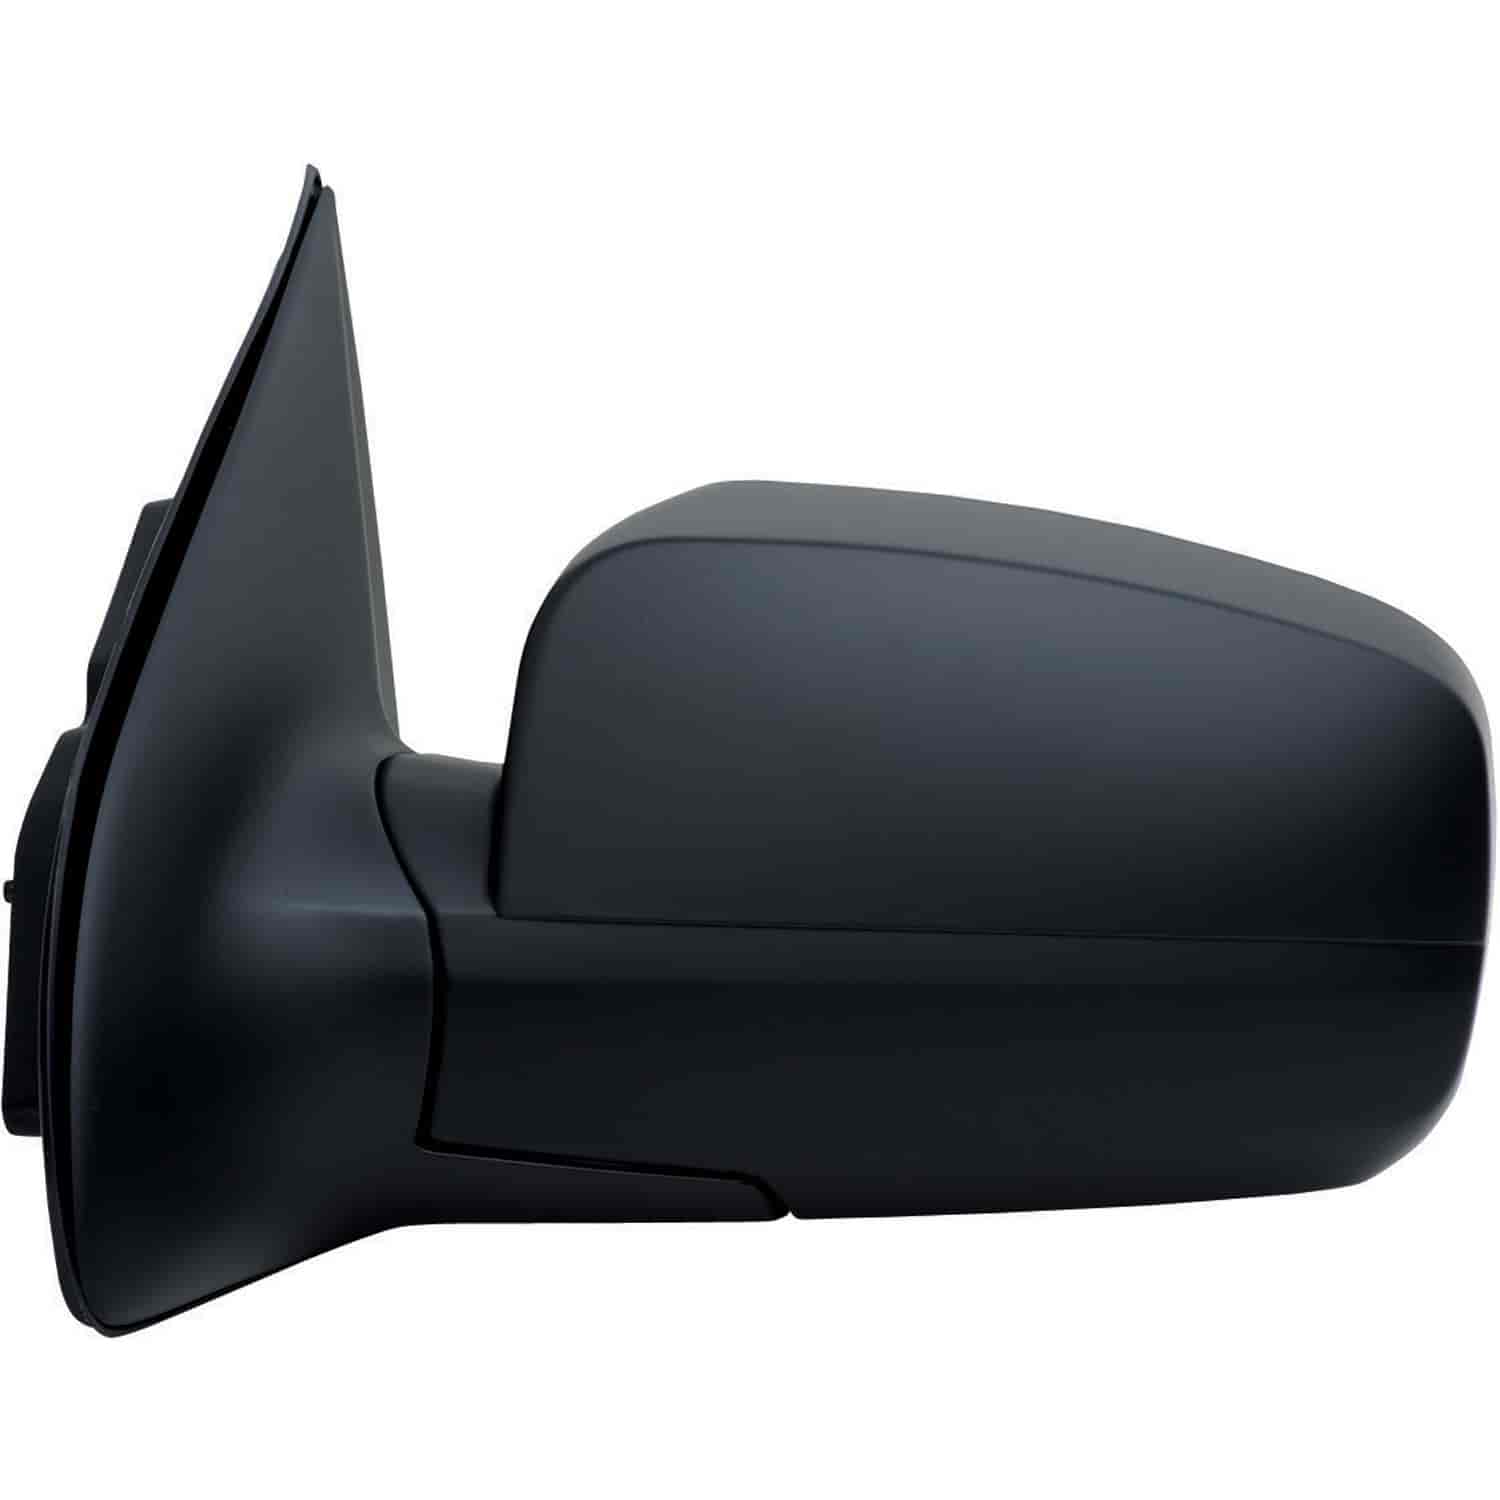 OEM Style Replacement mirror for 03-09 Kia Sorento EX model driver side mirror tested to fit and fun